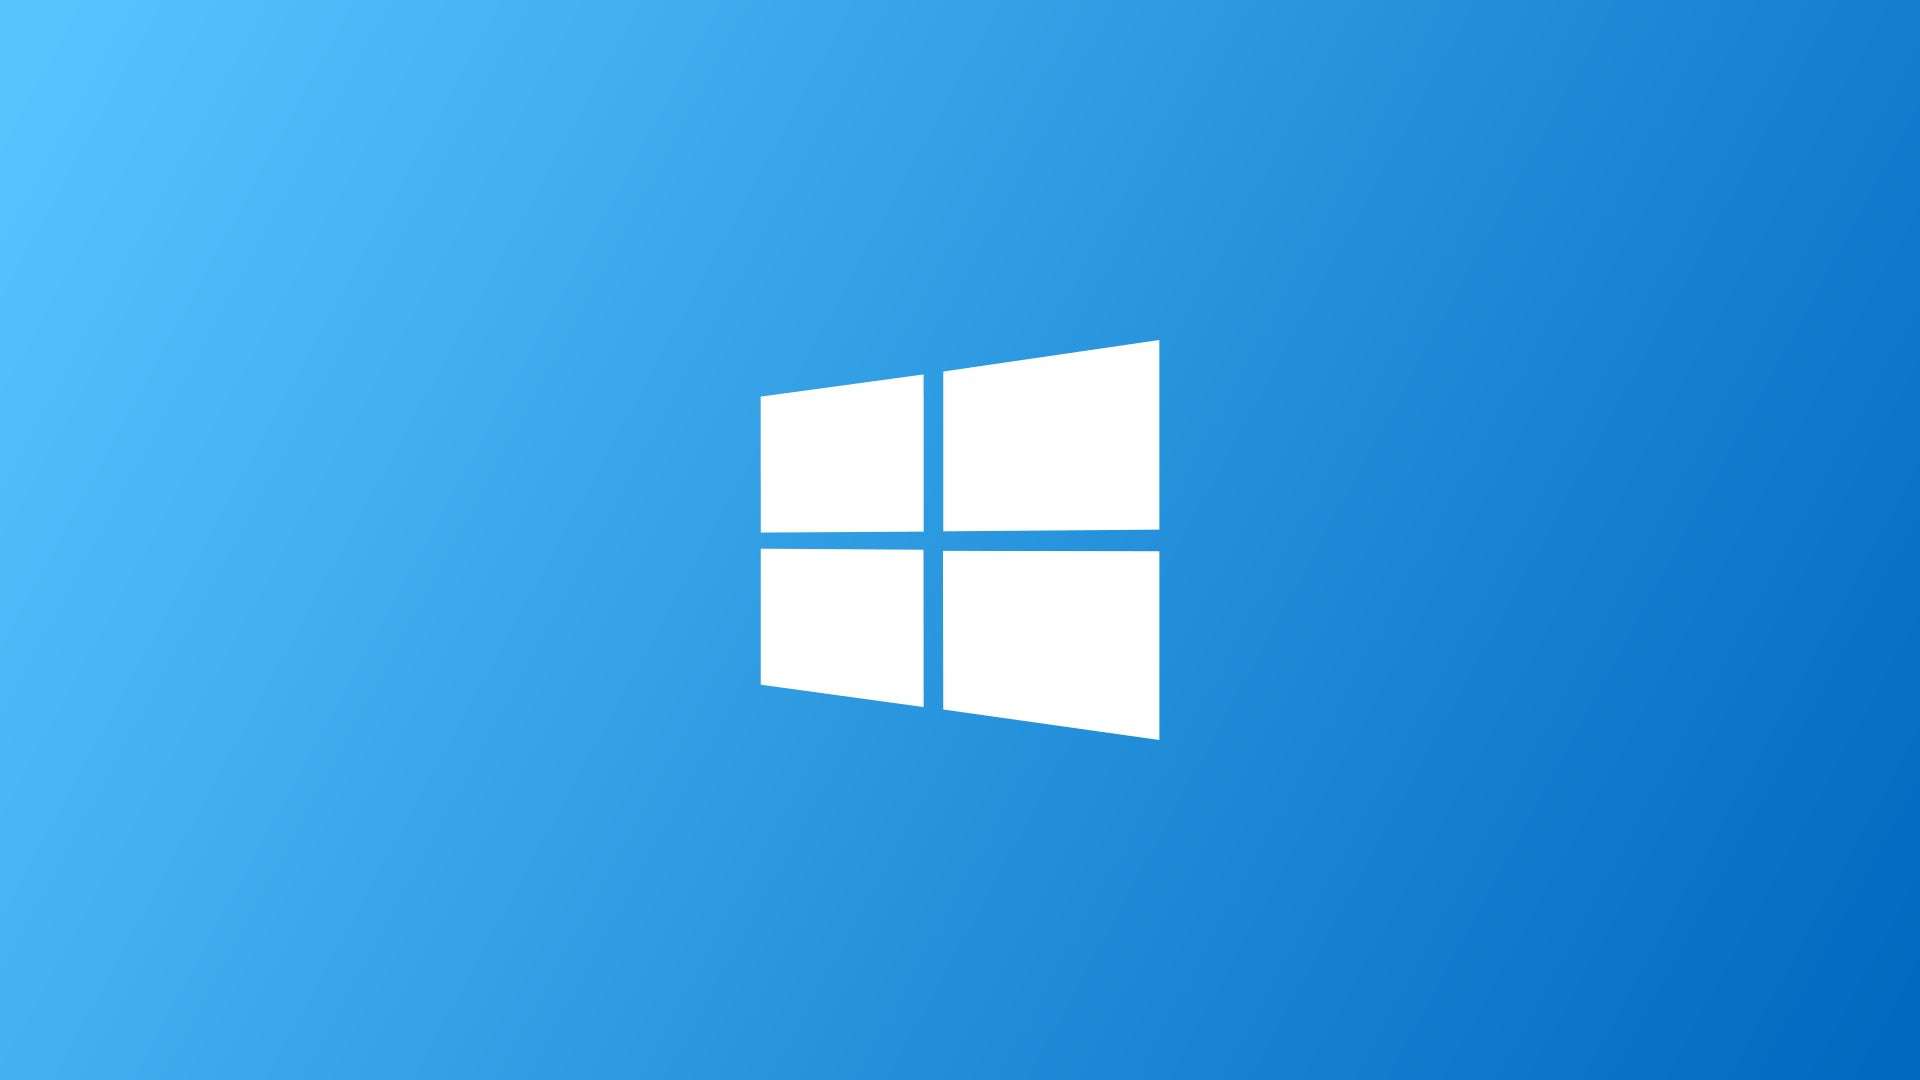 Microsoft announced and started testing Windows 10 (21H2) major update